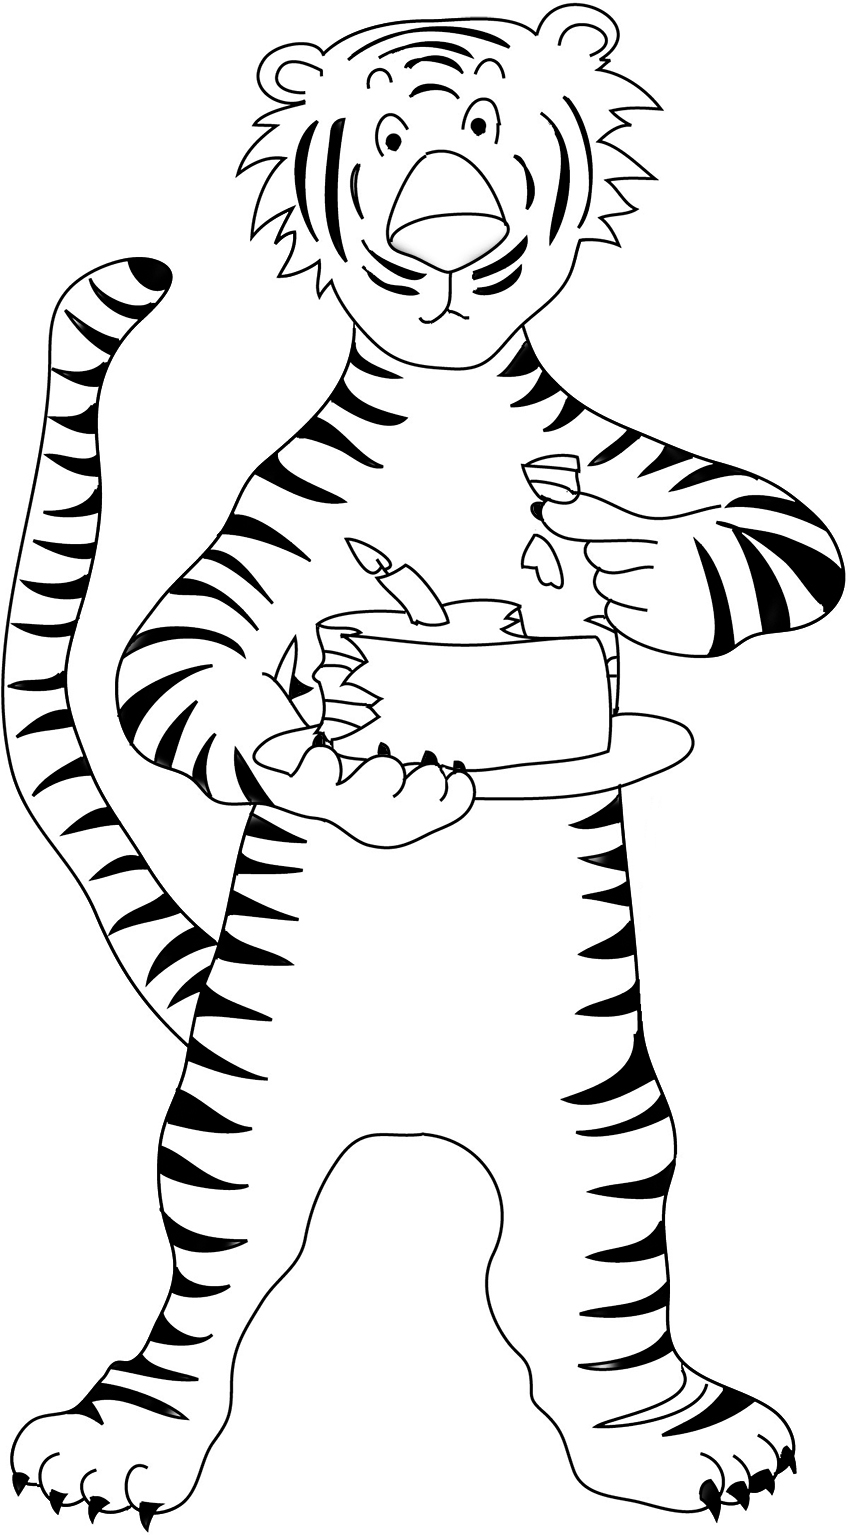 cute cartoon tigers coloring pages